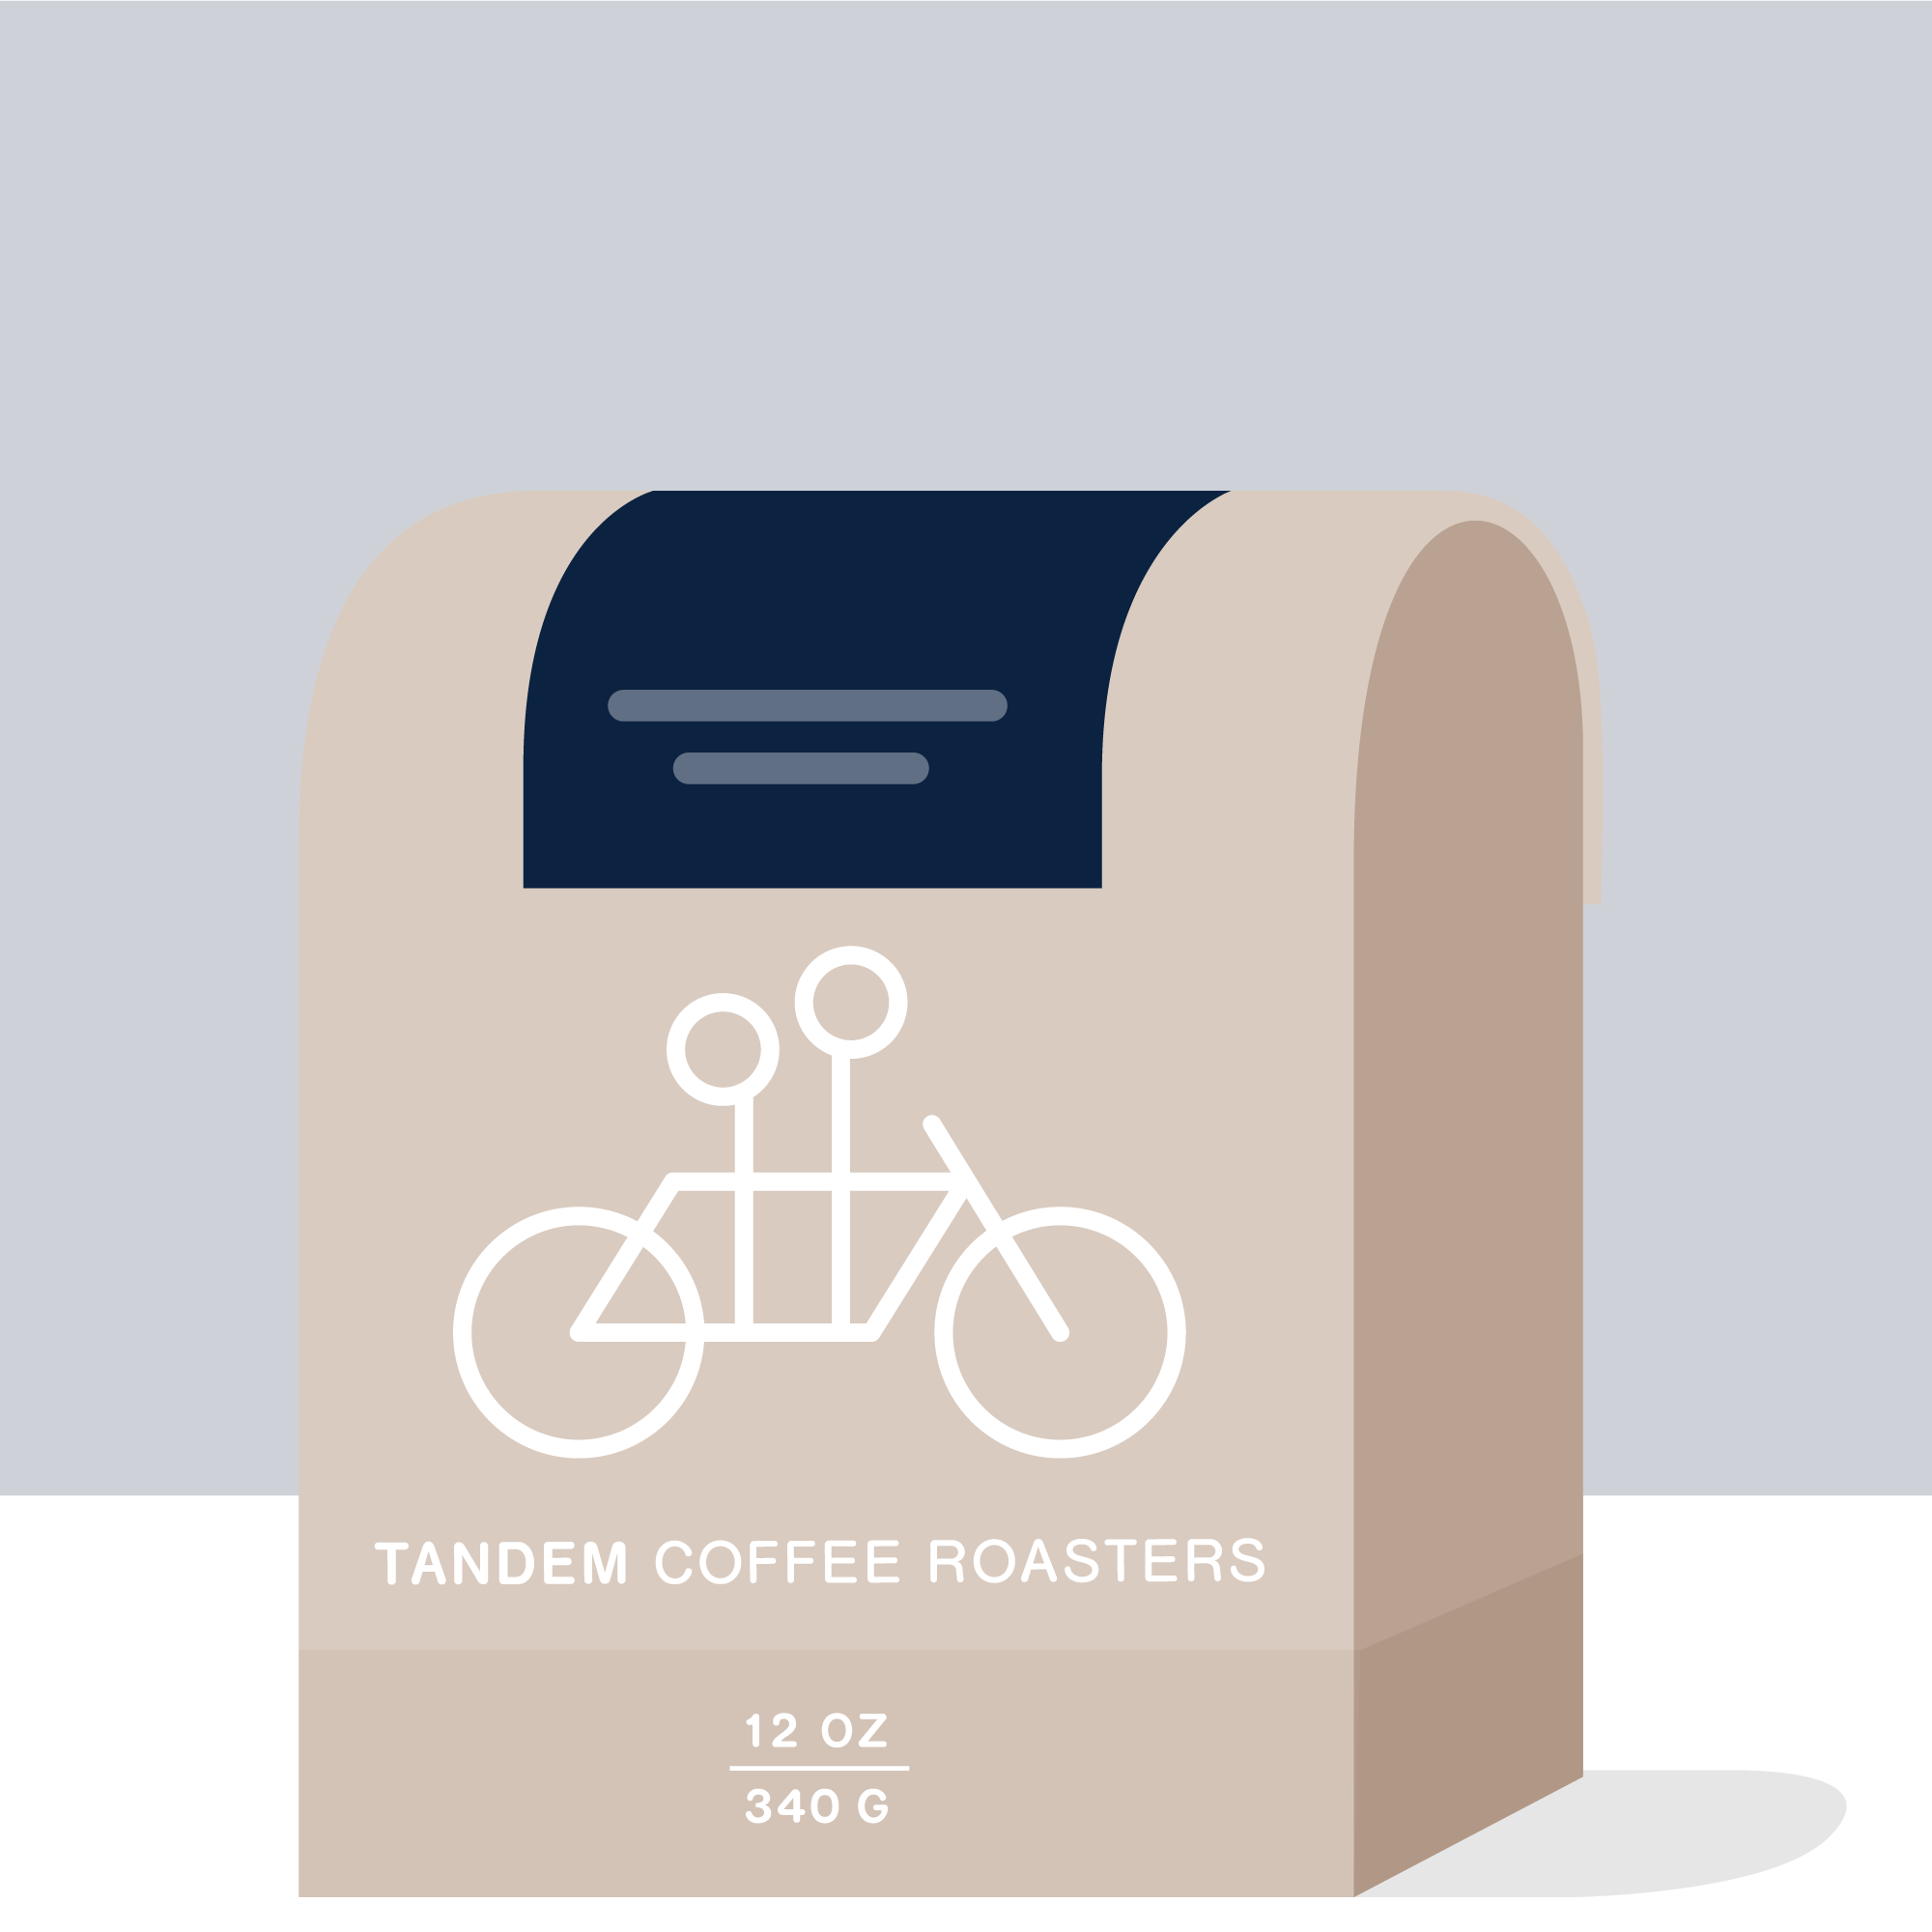 A flat, blue-toned illustration of a West End Blues light brown paper coffee bag from Tandem Coffee Roasters, featuring a white graphic of a tandem bicycle. The bag indicates drip coffee with hints of baking.